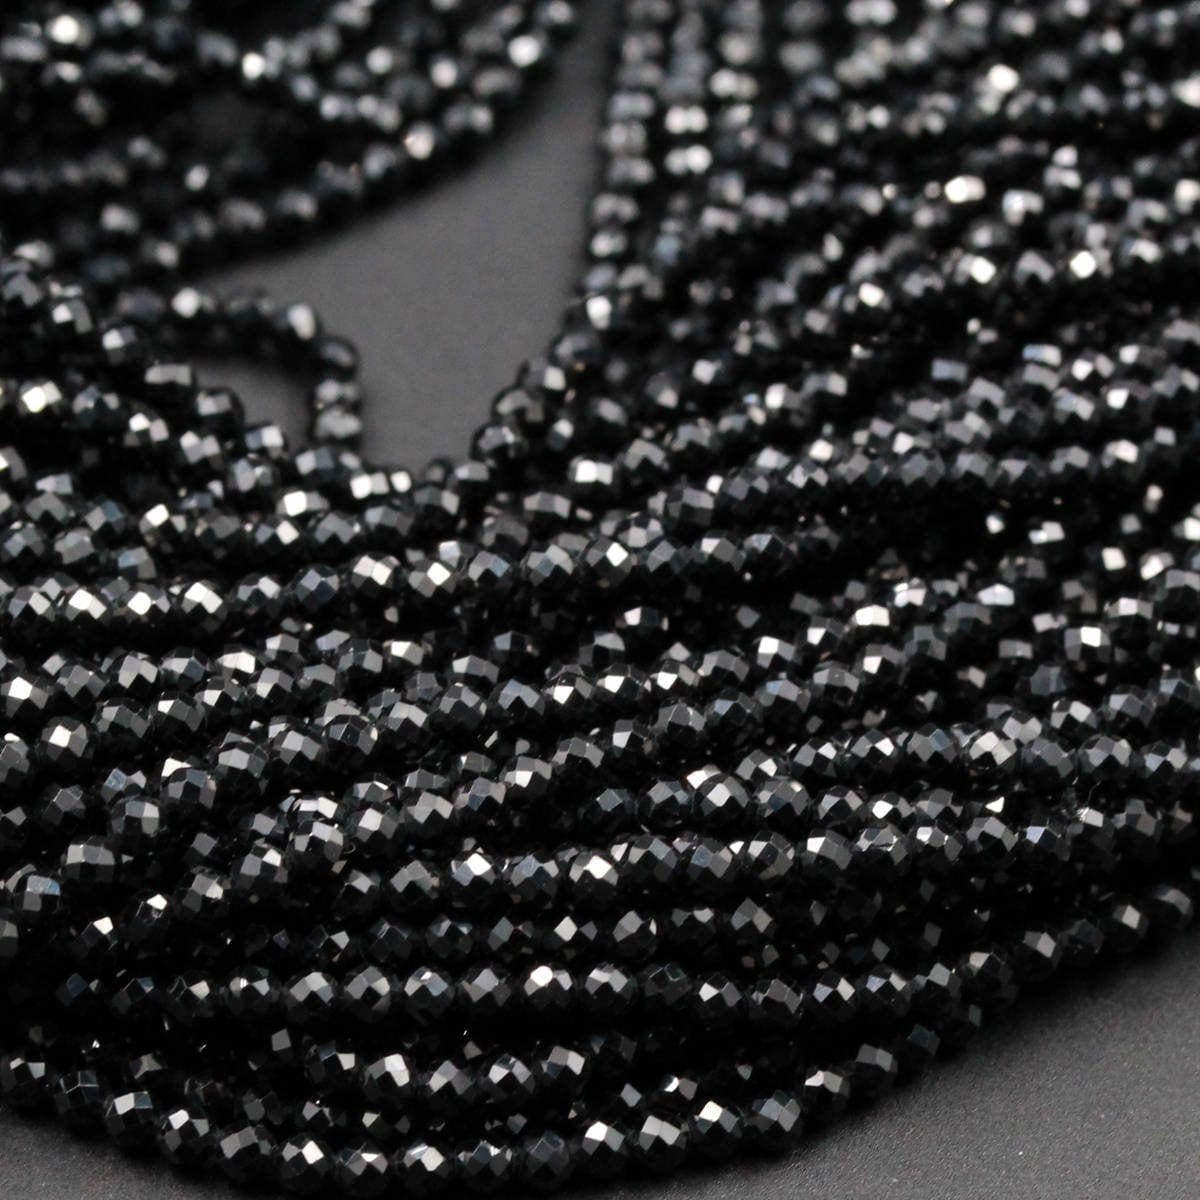  3.5-4mm Faceted Genuine Black Spinel Rondelle Beads Necklace,21  Inches Necklace, Healing Beads Necklace : Arts, Crafts & Sewing